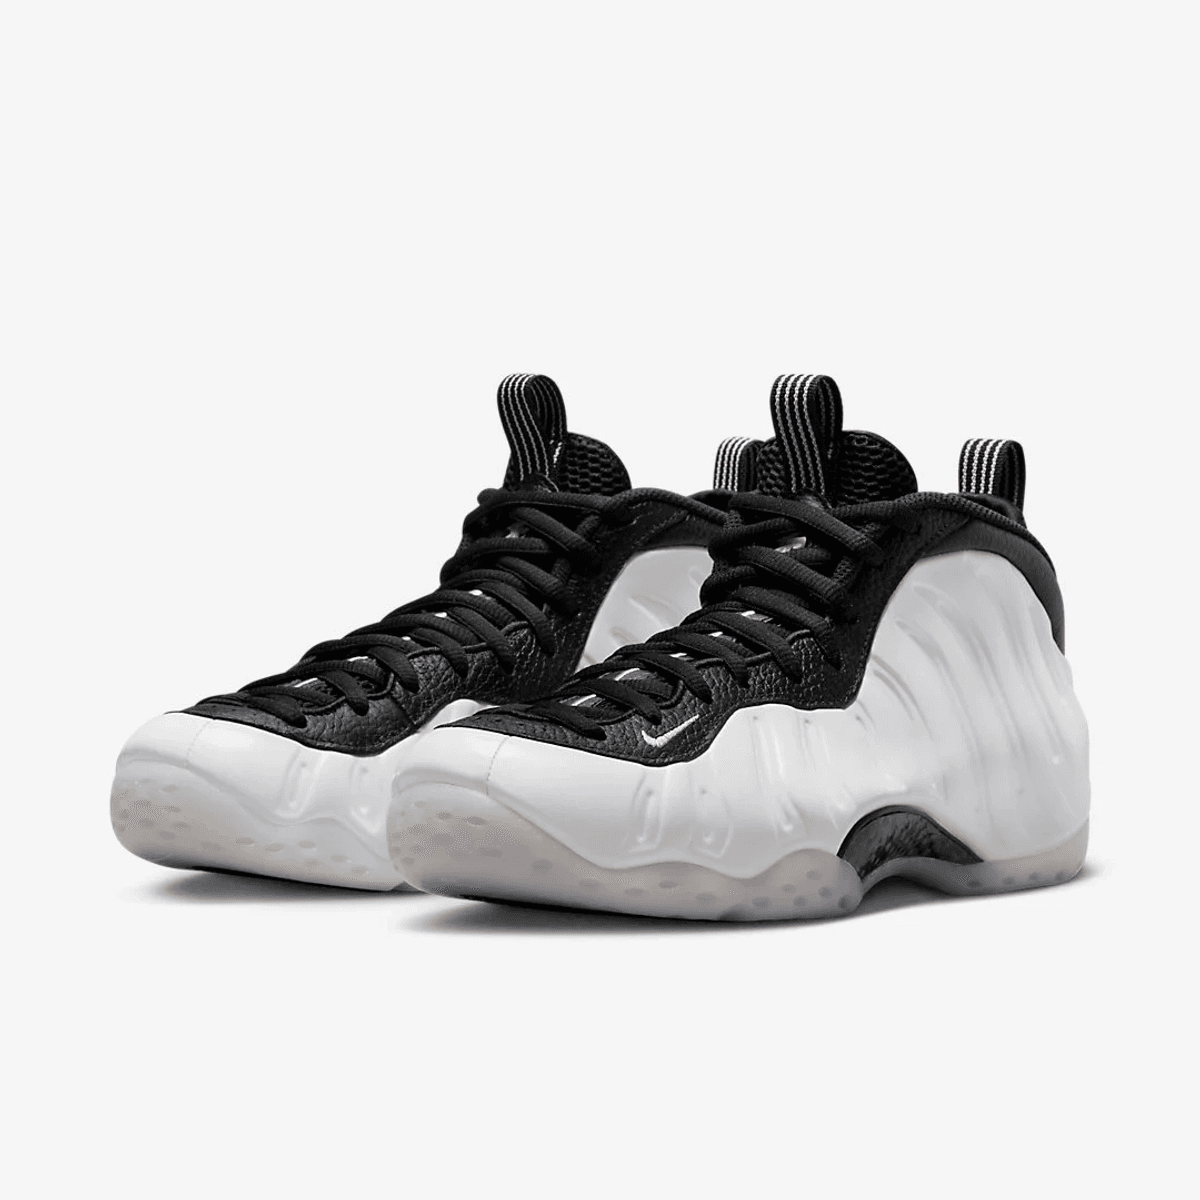 The Extremely Rare Penny Hardaway Nike Air Foamposite PE Will Finally Release In 2023